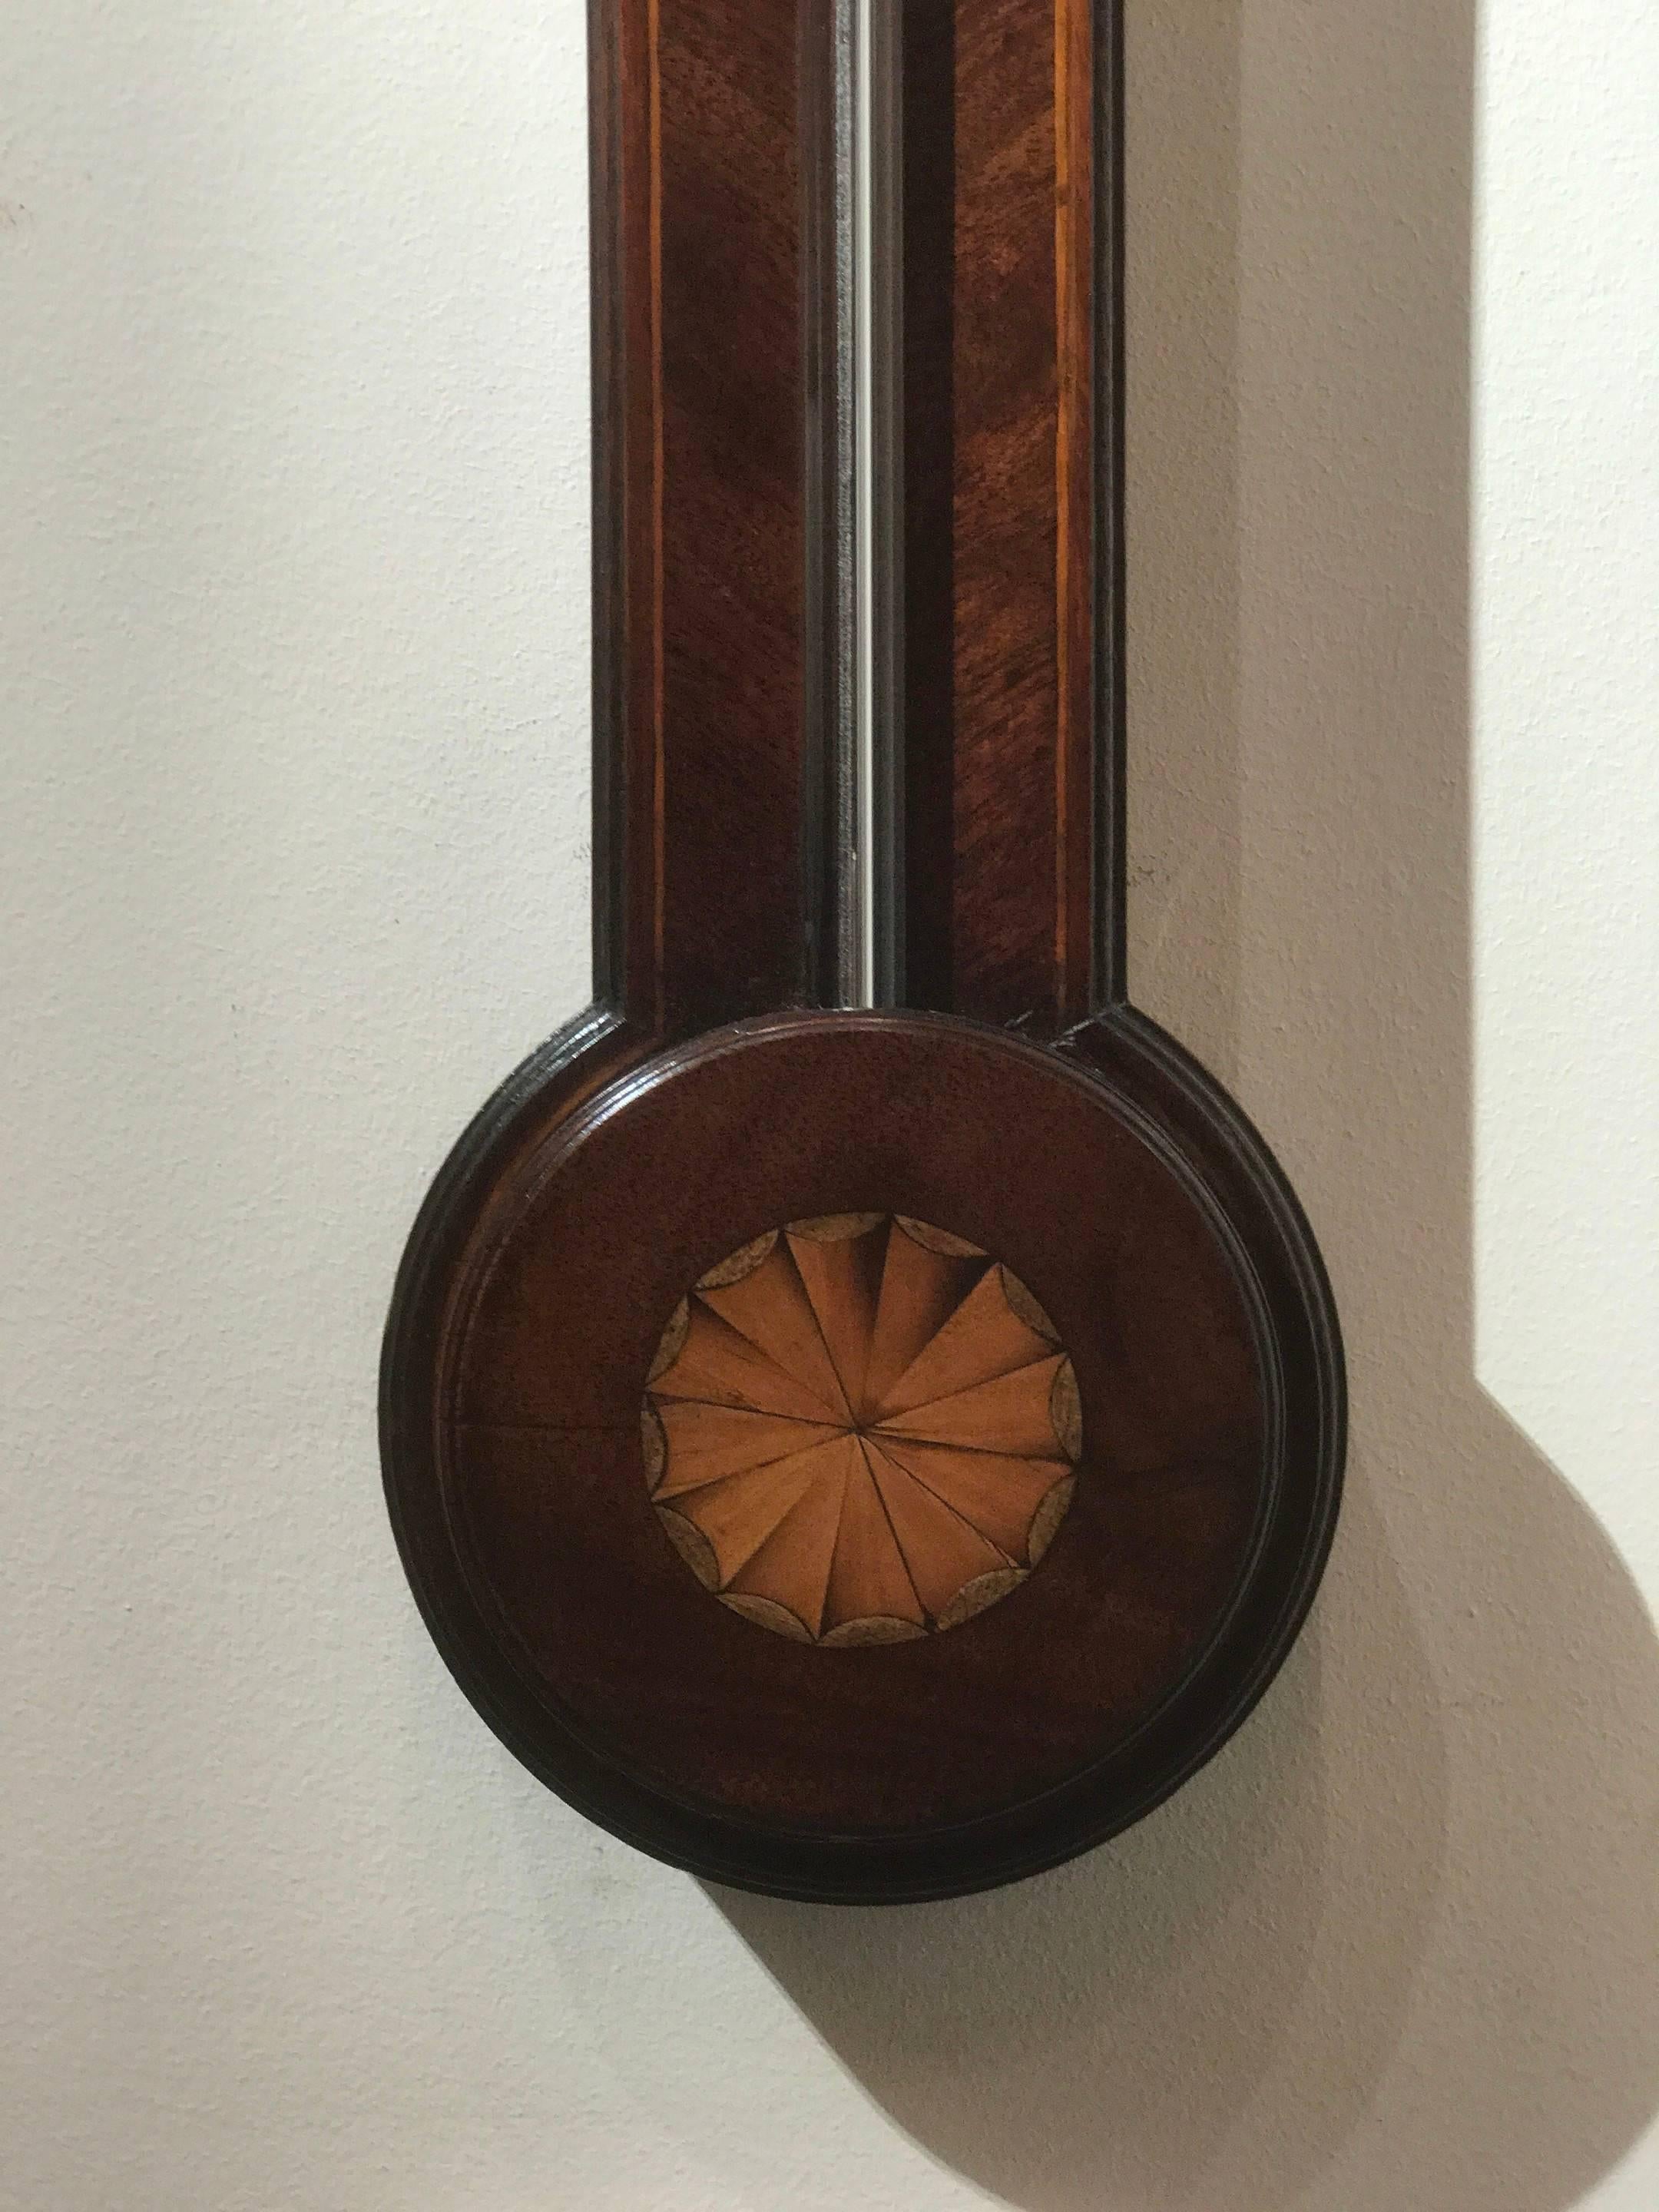 Early 19th Century Antique George III Mahogany Stick Barometer by Cremonino In Good Condition For Sale In Devon, GB